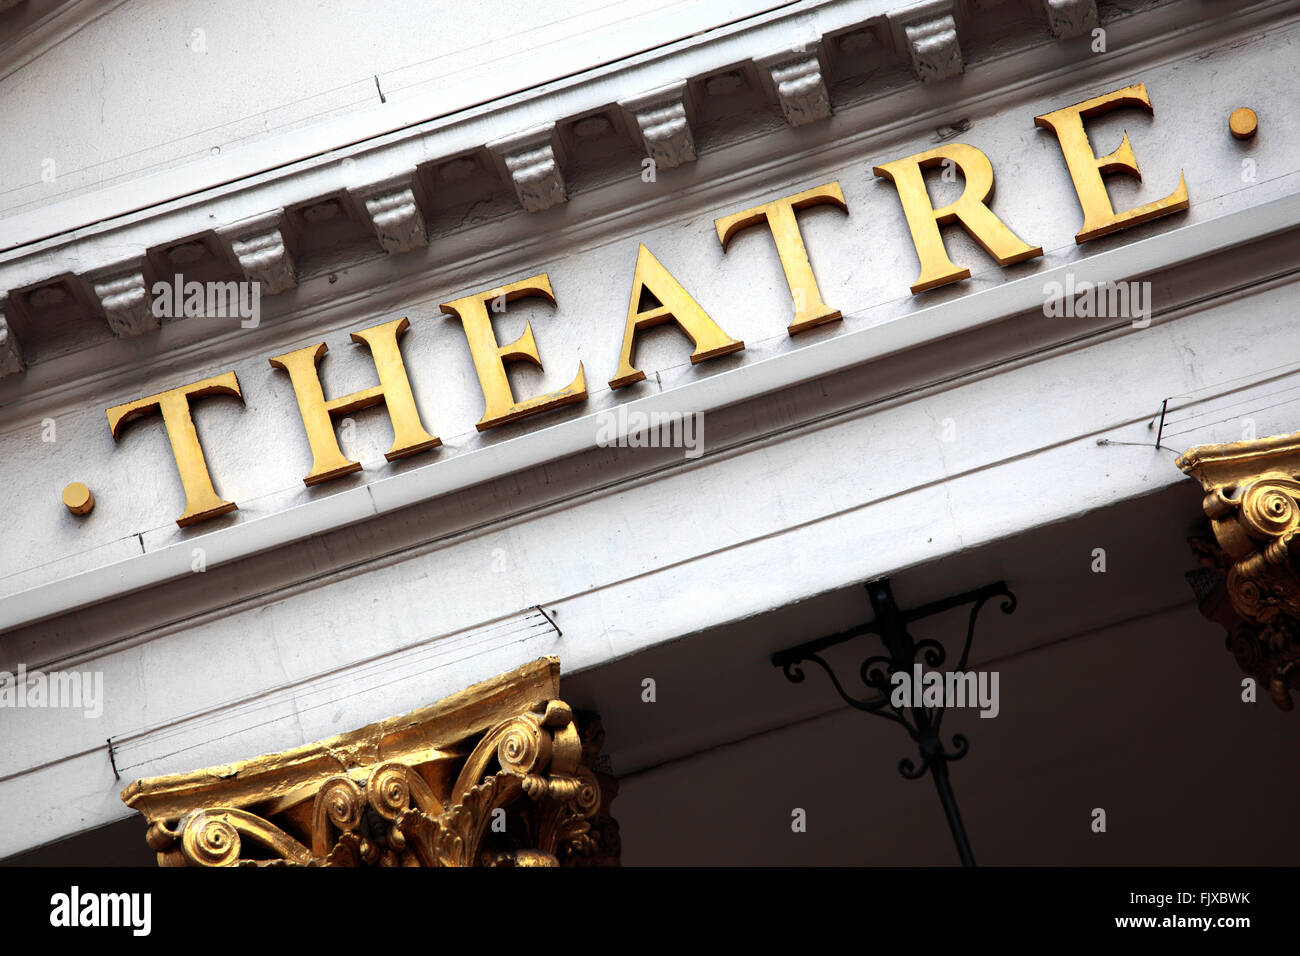 Theatre sign and facade in gold and white. Stock Photo